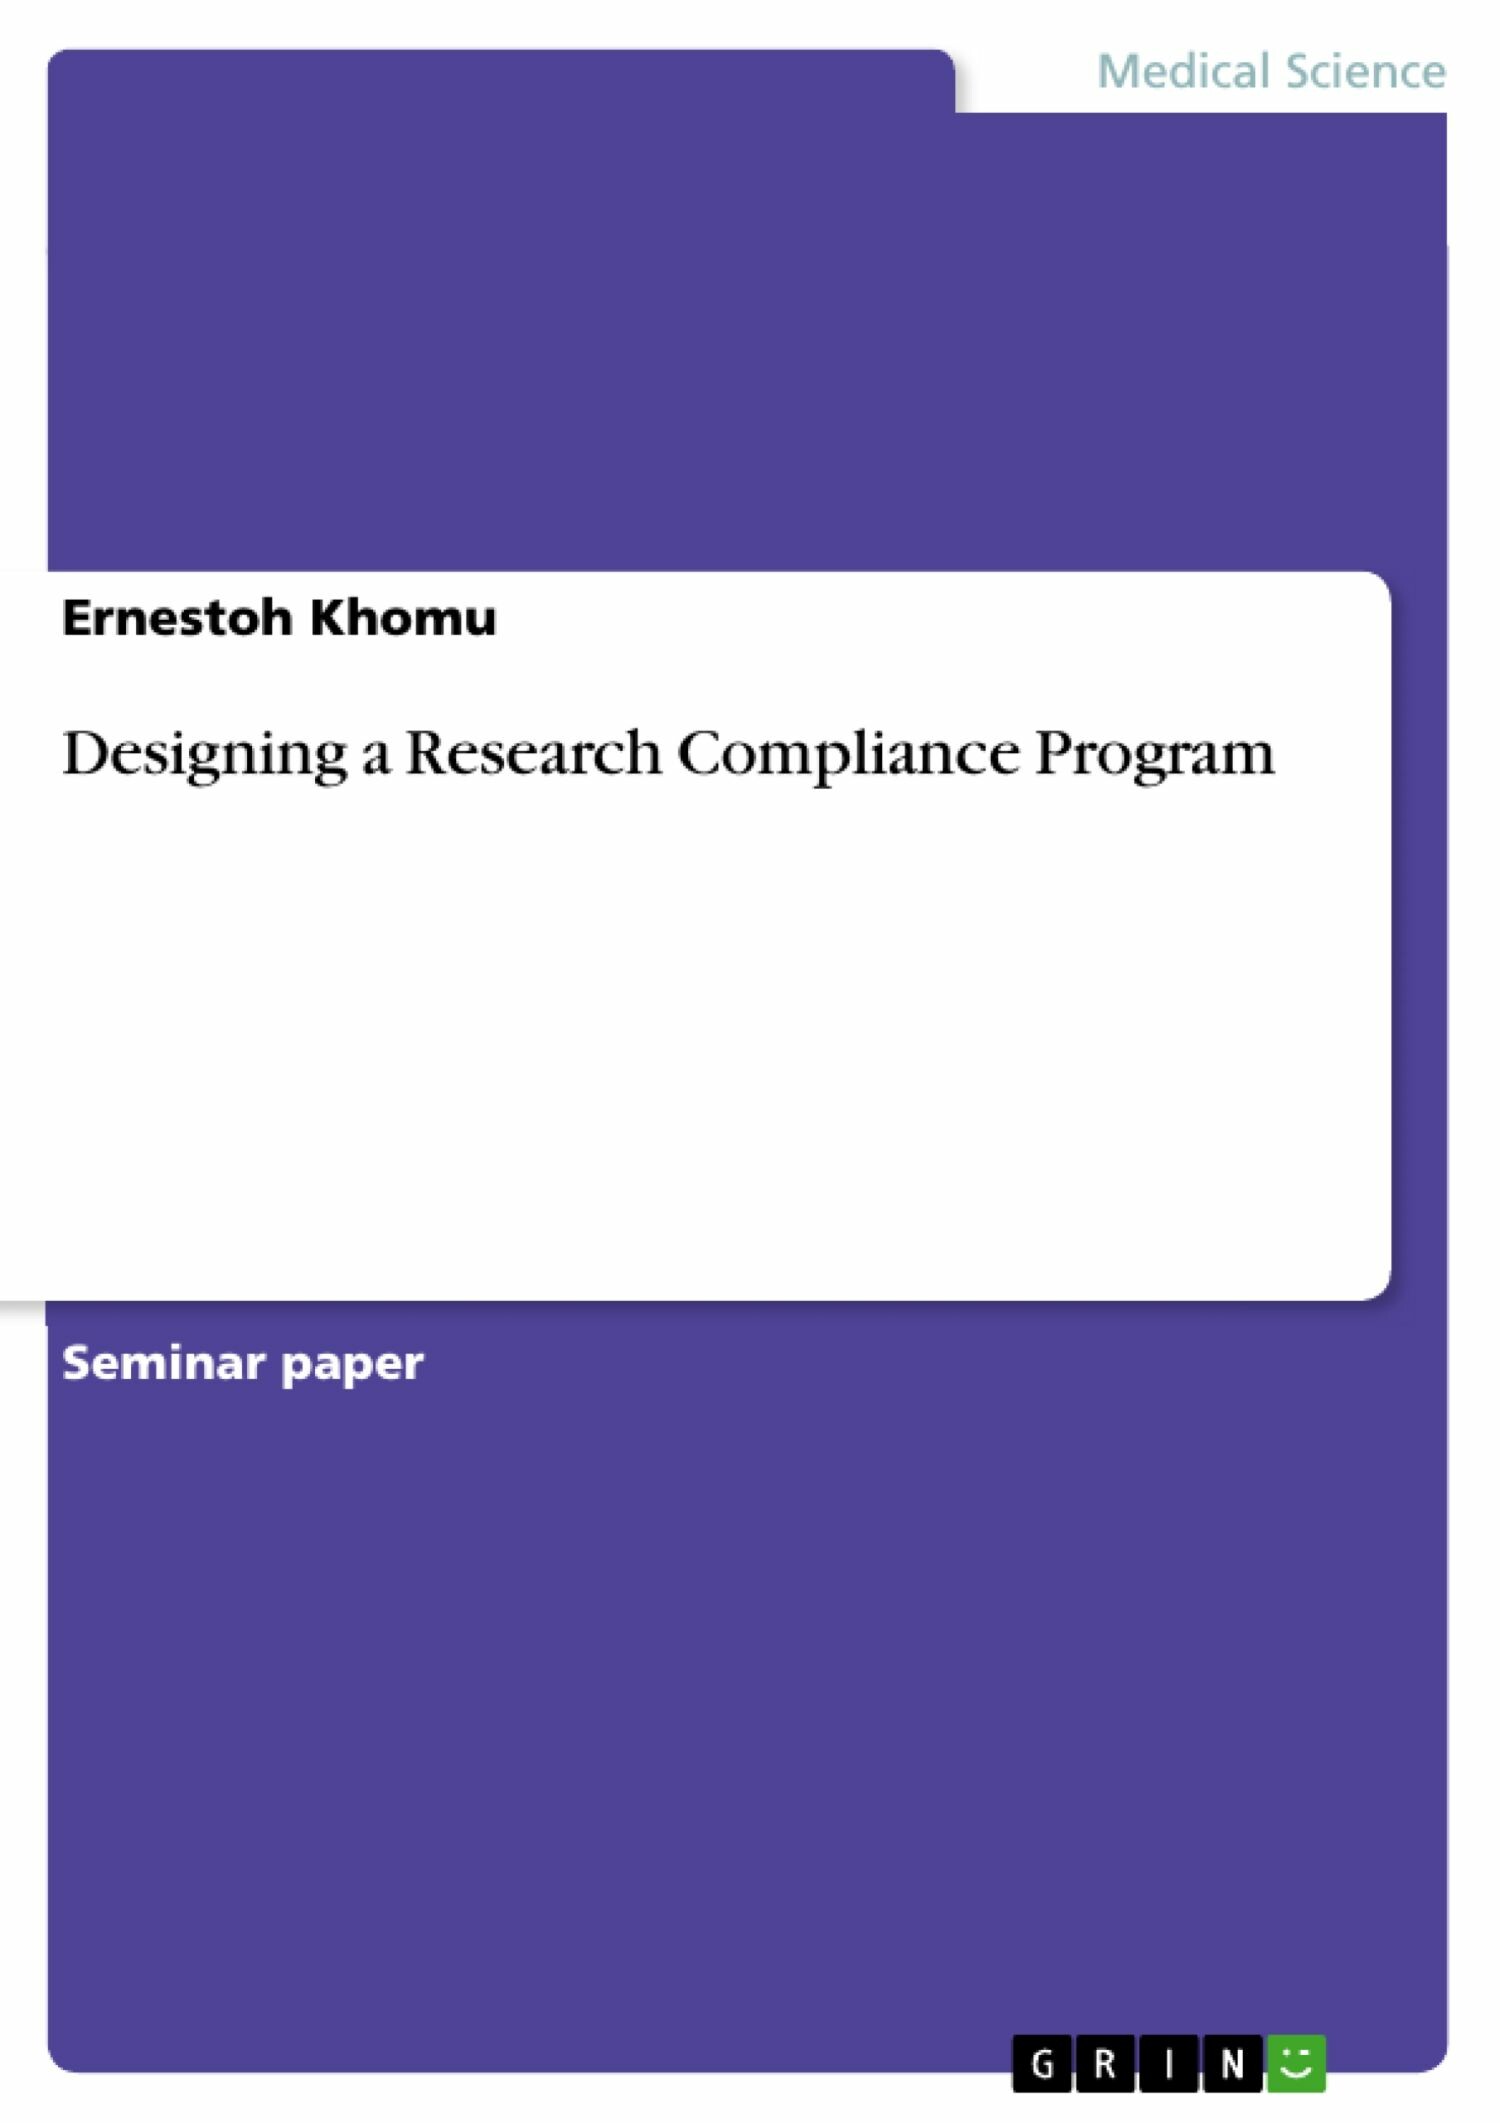 Designing a Research Compliance Program